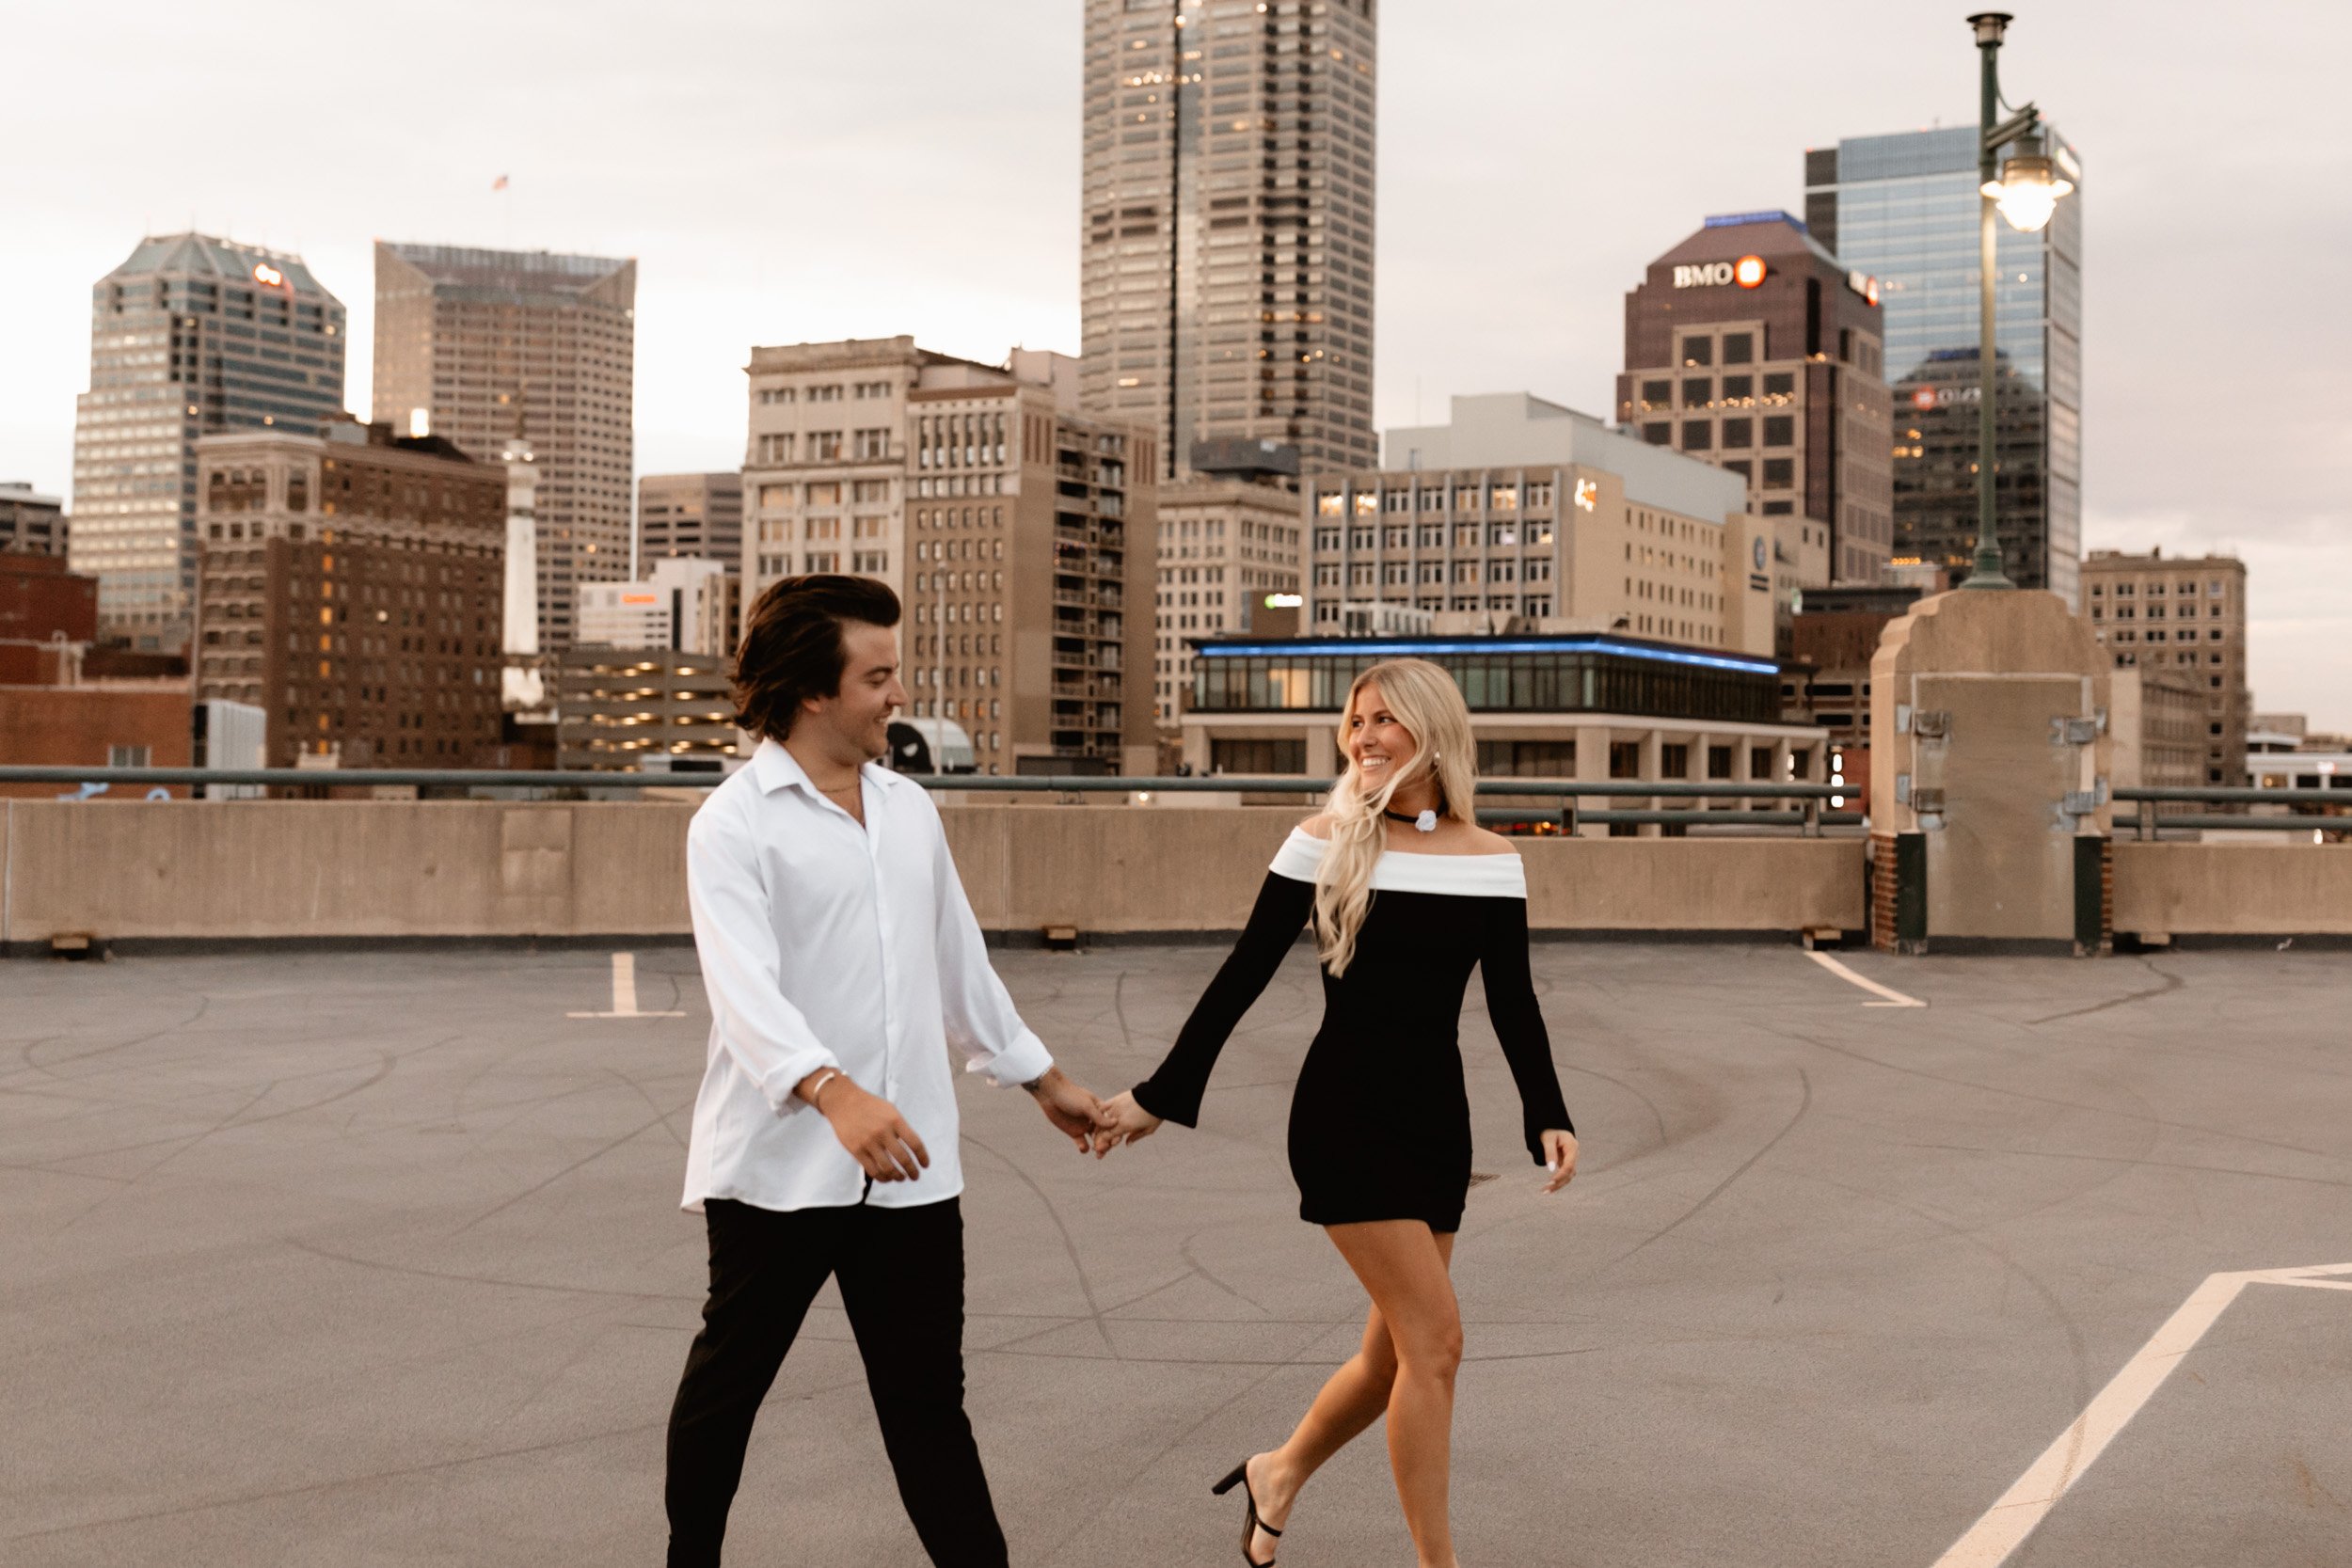 downtown-indianapolis-engagement-shoot-32.jpg